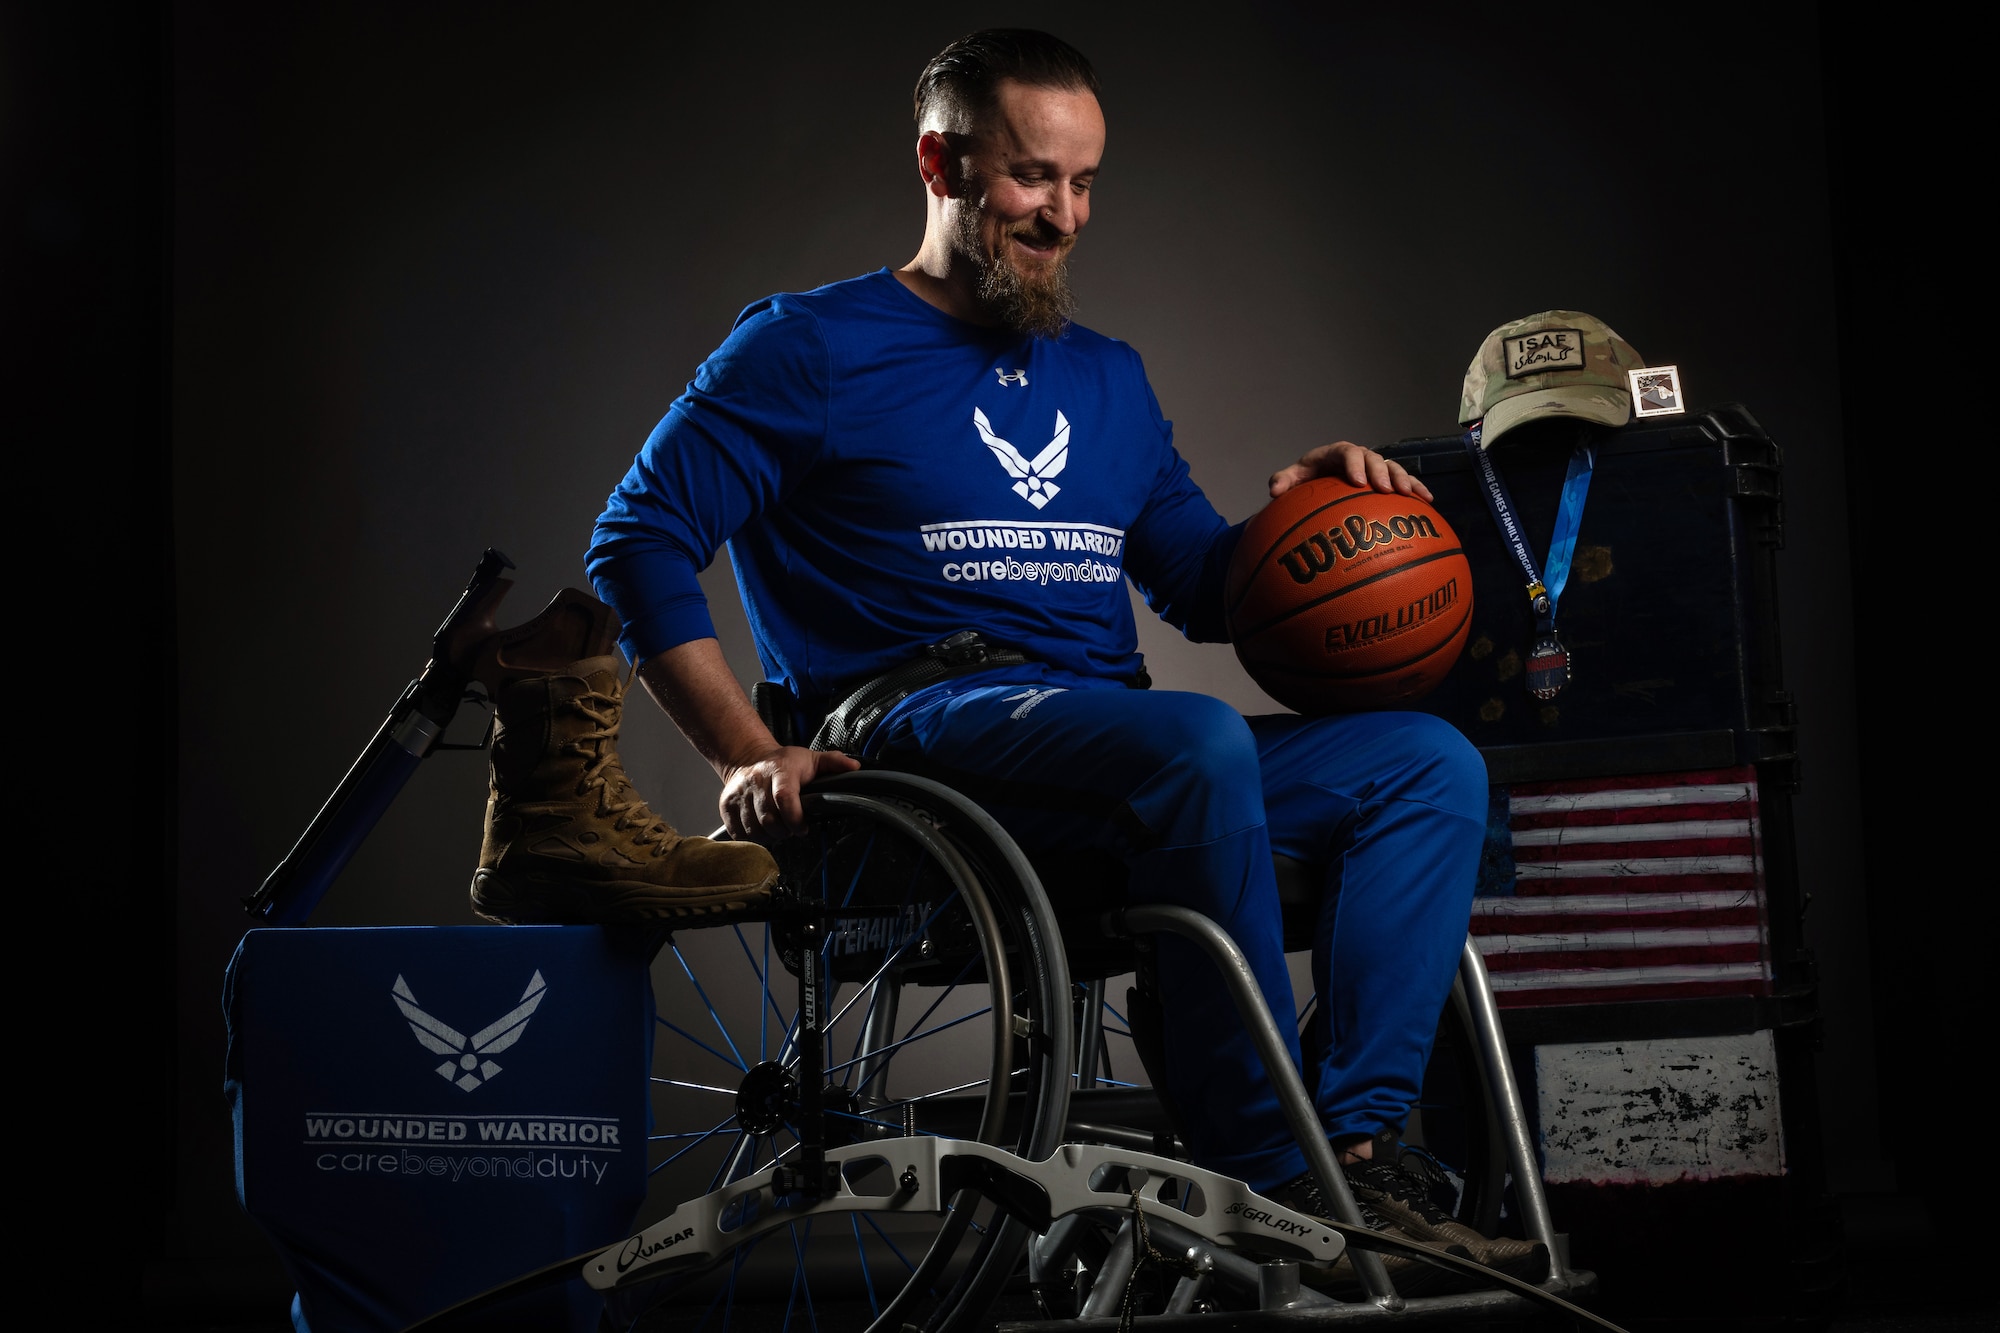 James Phelps, a prior U.S. Air Force technical sergeant who has four Afghanistan deployments, sits in his wheelchair surrounded by wounded warrior sports memorabilia at Joint Base Elmendorf-Richardson, Alaska, May 17, 2023. Phelps spent most of his career as an integrated avionics craftsman with the 211th and 212th Rescue squadrons and said the strain of war, combat deployments, Post-traumatic Stress Disorder and the suicide of his best friend brought him to a low point in his life. His wife, the Fisher House Foundation and the Warrior Games intervened. "I met some amazing souls as I let go of the shame I held for not having reached 20 active-duty years," Phelps said. "I learned compassion, which allowed me to let go of resentment in regards to my military service. Most impressively, we started to heal.” He continues to compete in the Wounded Warrior Games and strongly advocates for struggling service members to reach out for help. "You are not alone," he said. (U.S. Air Force photo by Justin Connaher)